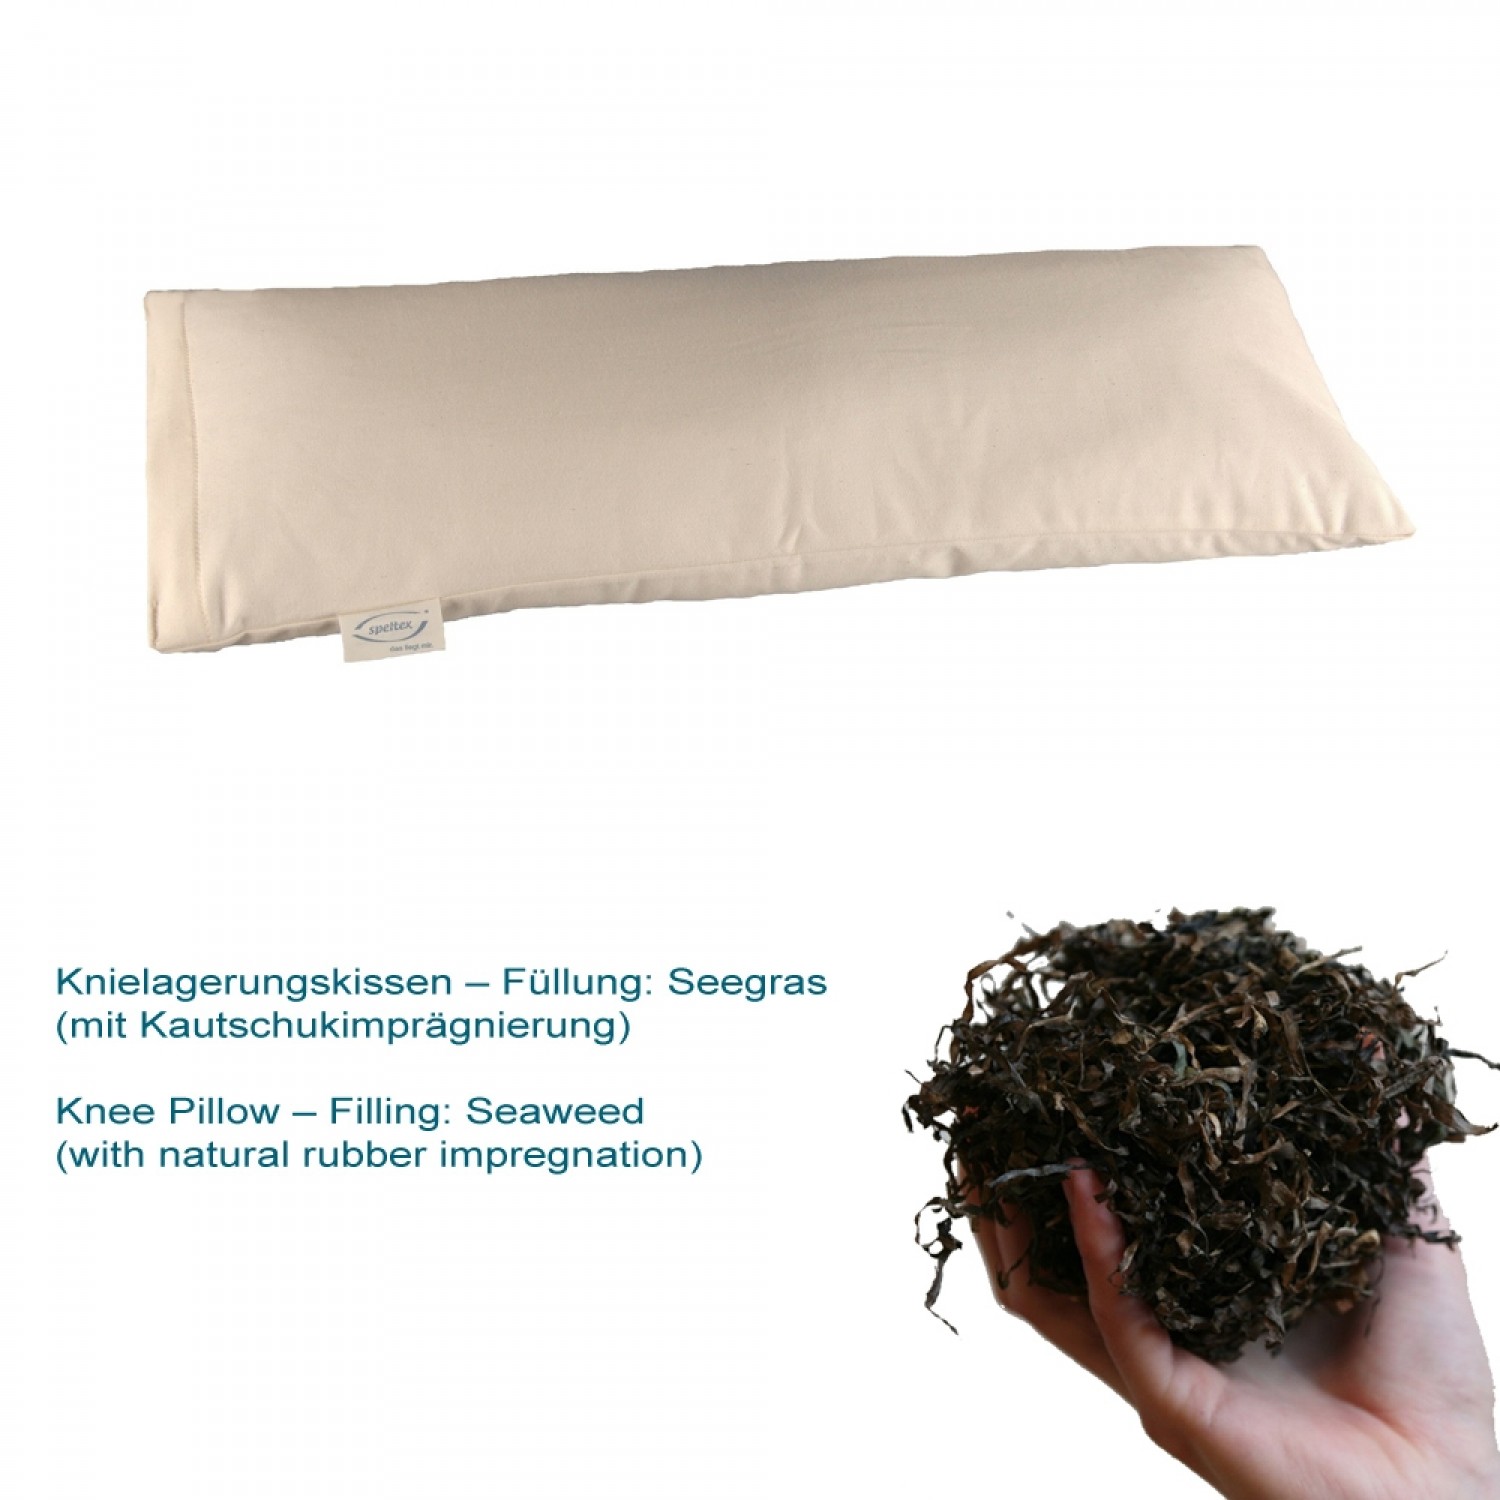 Knee pillow with Seaweed with natural rubber impregnation | speltex